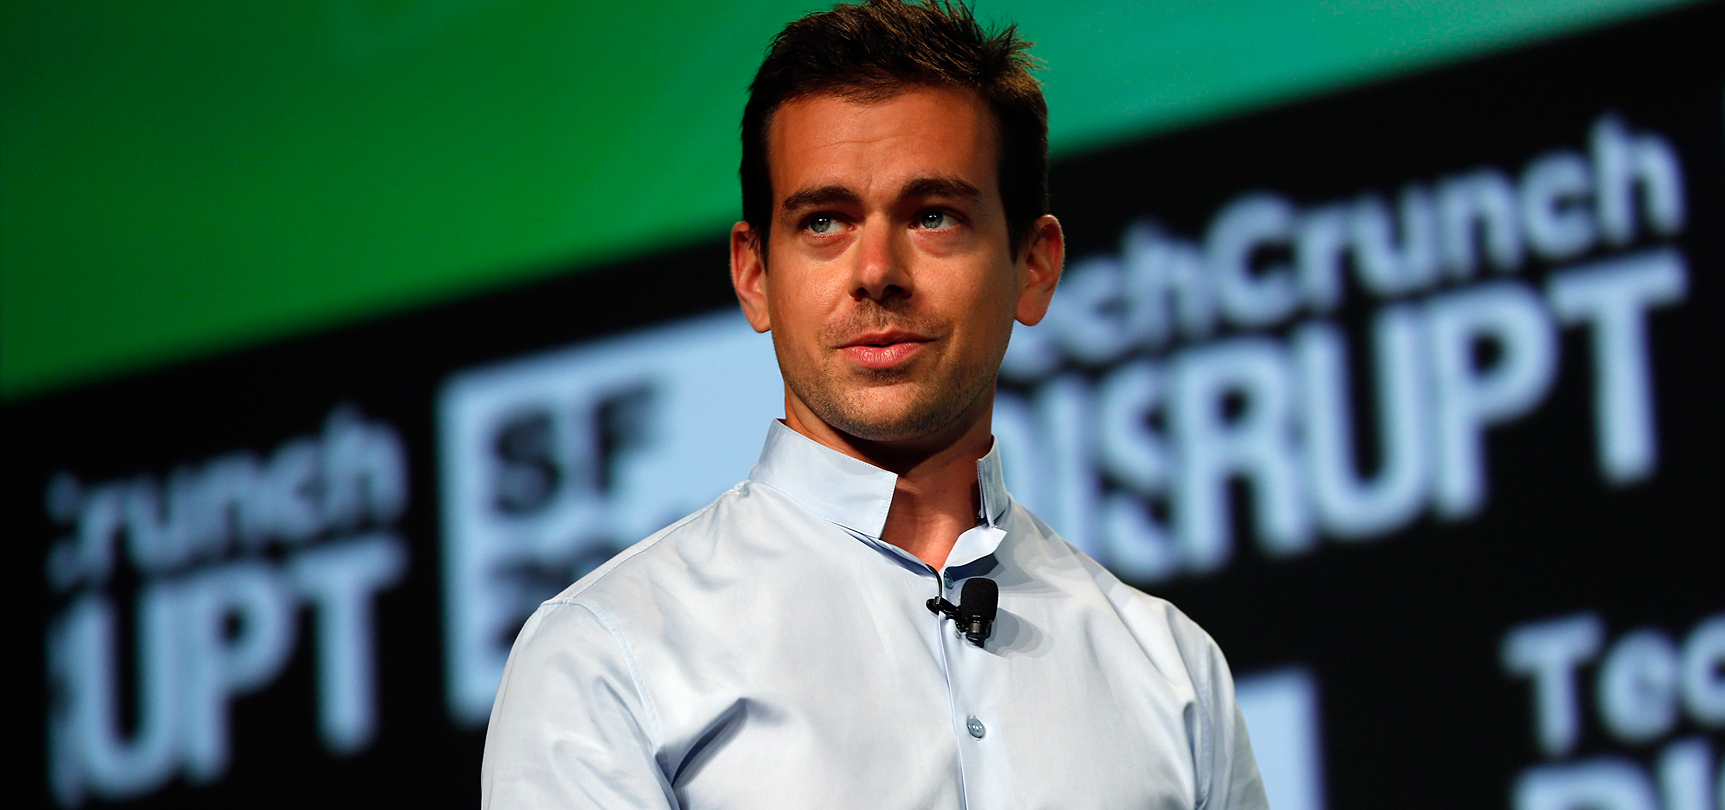 Photo of Jack gives back: Twitter CEO gives a third of his stock to employees